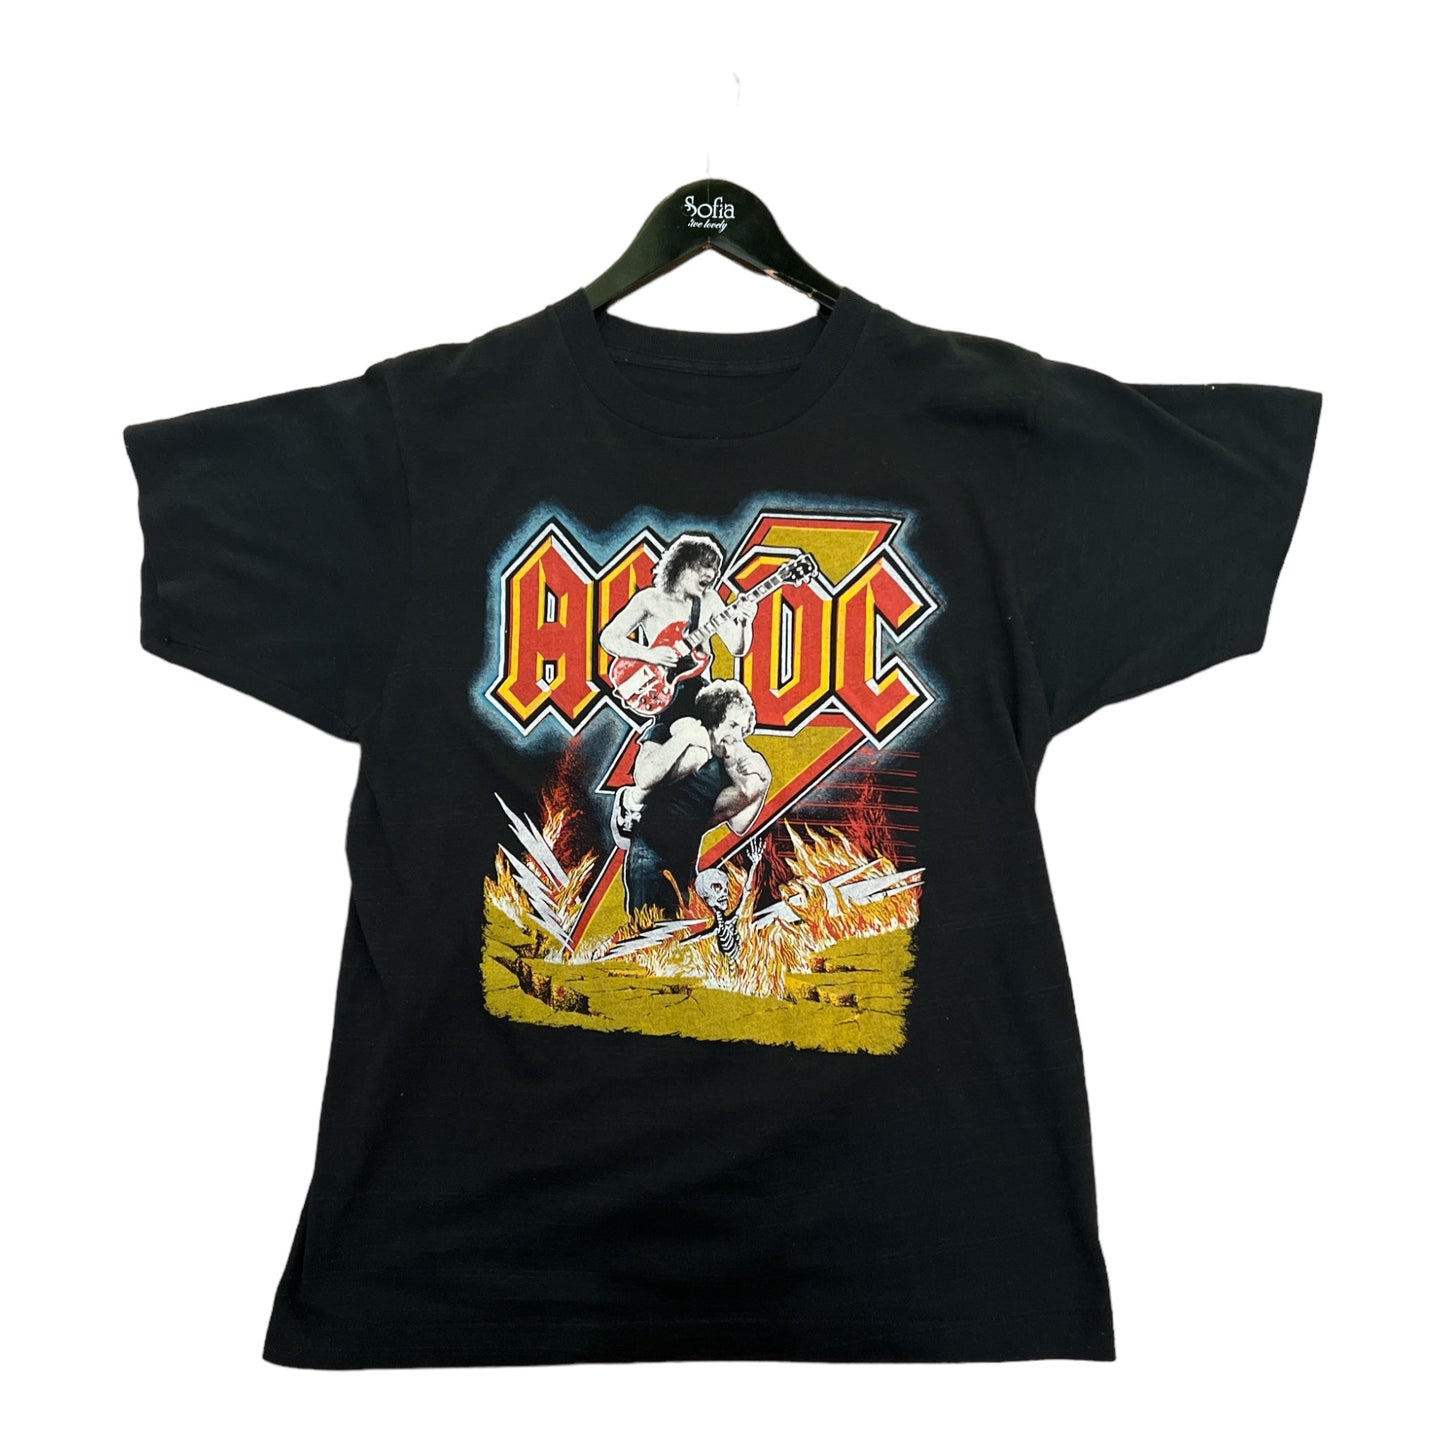 Vintage 1986 ACDC Tee - Something about Sofia